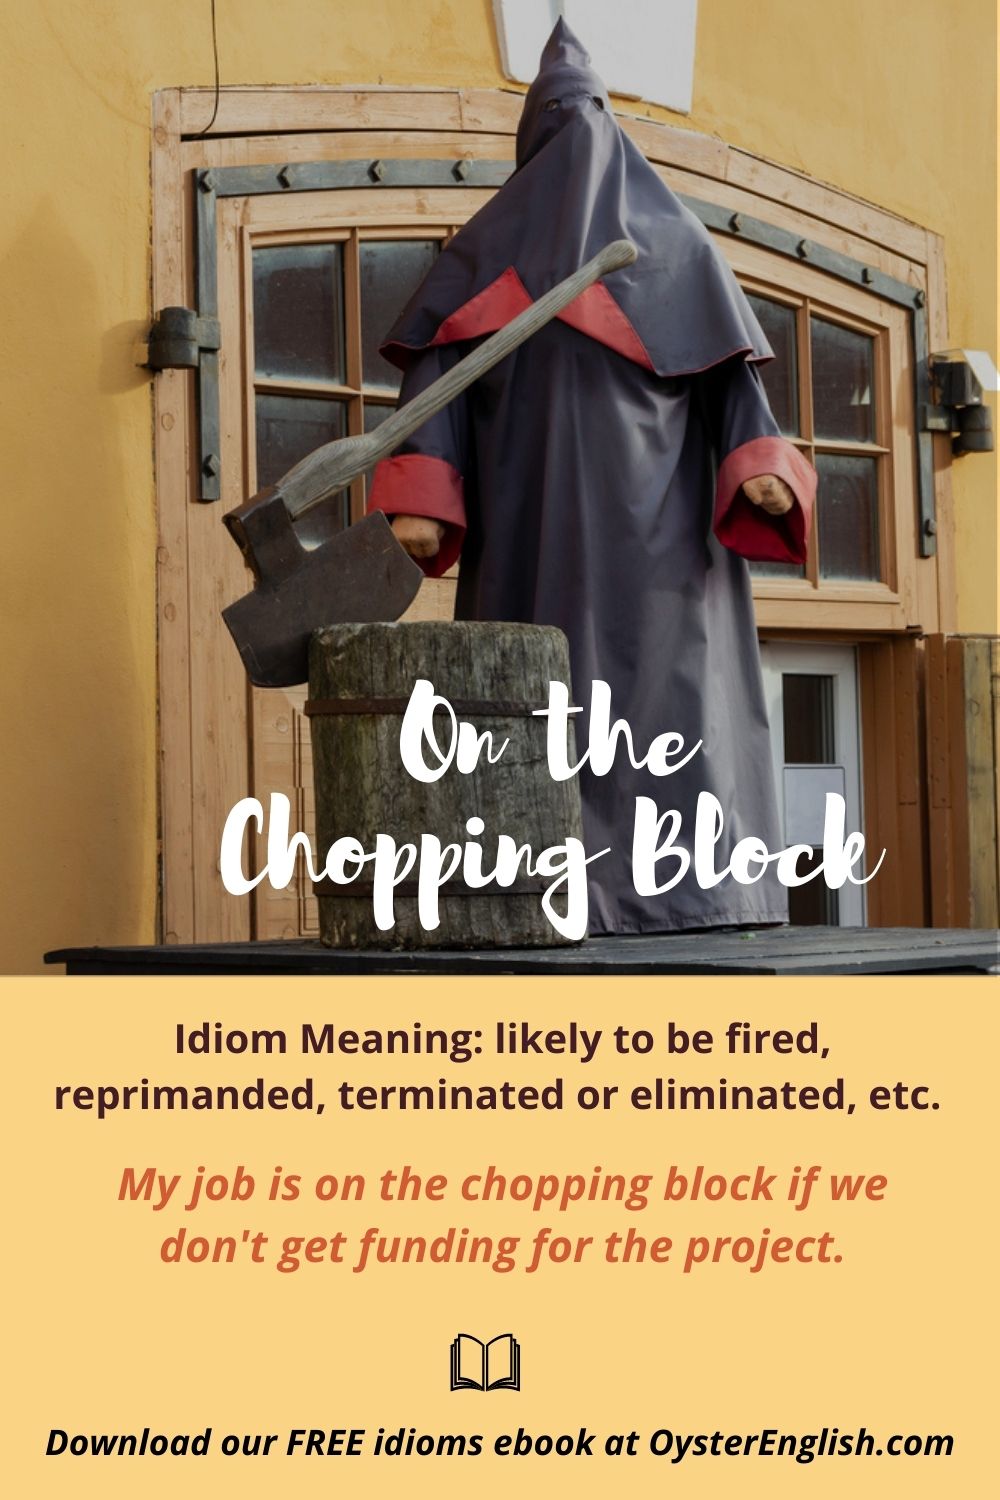 A Medieval executioner, wearing a hooded cloak, stands at a chopping block that has a huge ax in it. Caption: My job is on the chopping block if we don't get funding for the project.